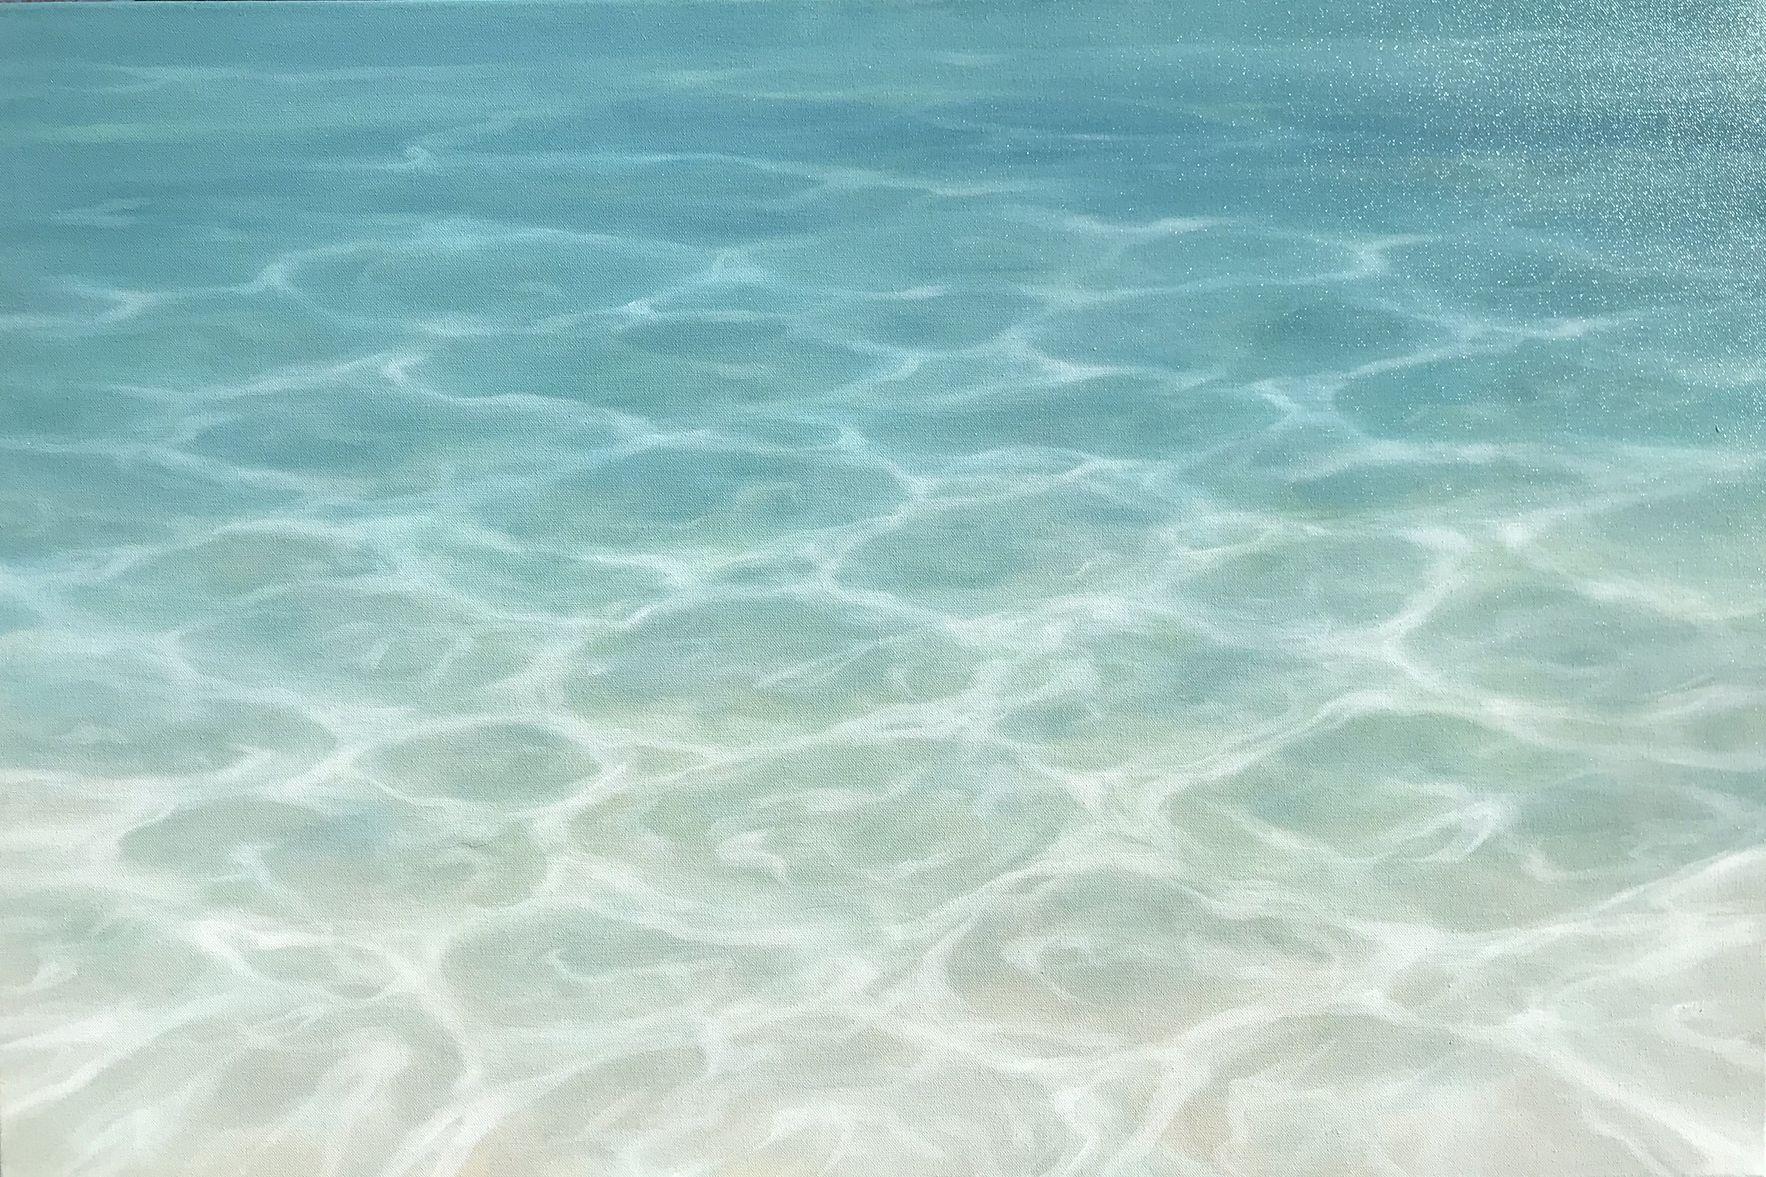 Inspired by the desire to linger near or in warm tropical waters, watching the mesmerizing patterns of light refractions as they move with the currents.   :: Painting :: Realism :: This piece comes with an official certificate of authenticity signed